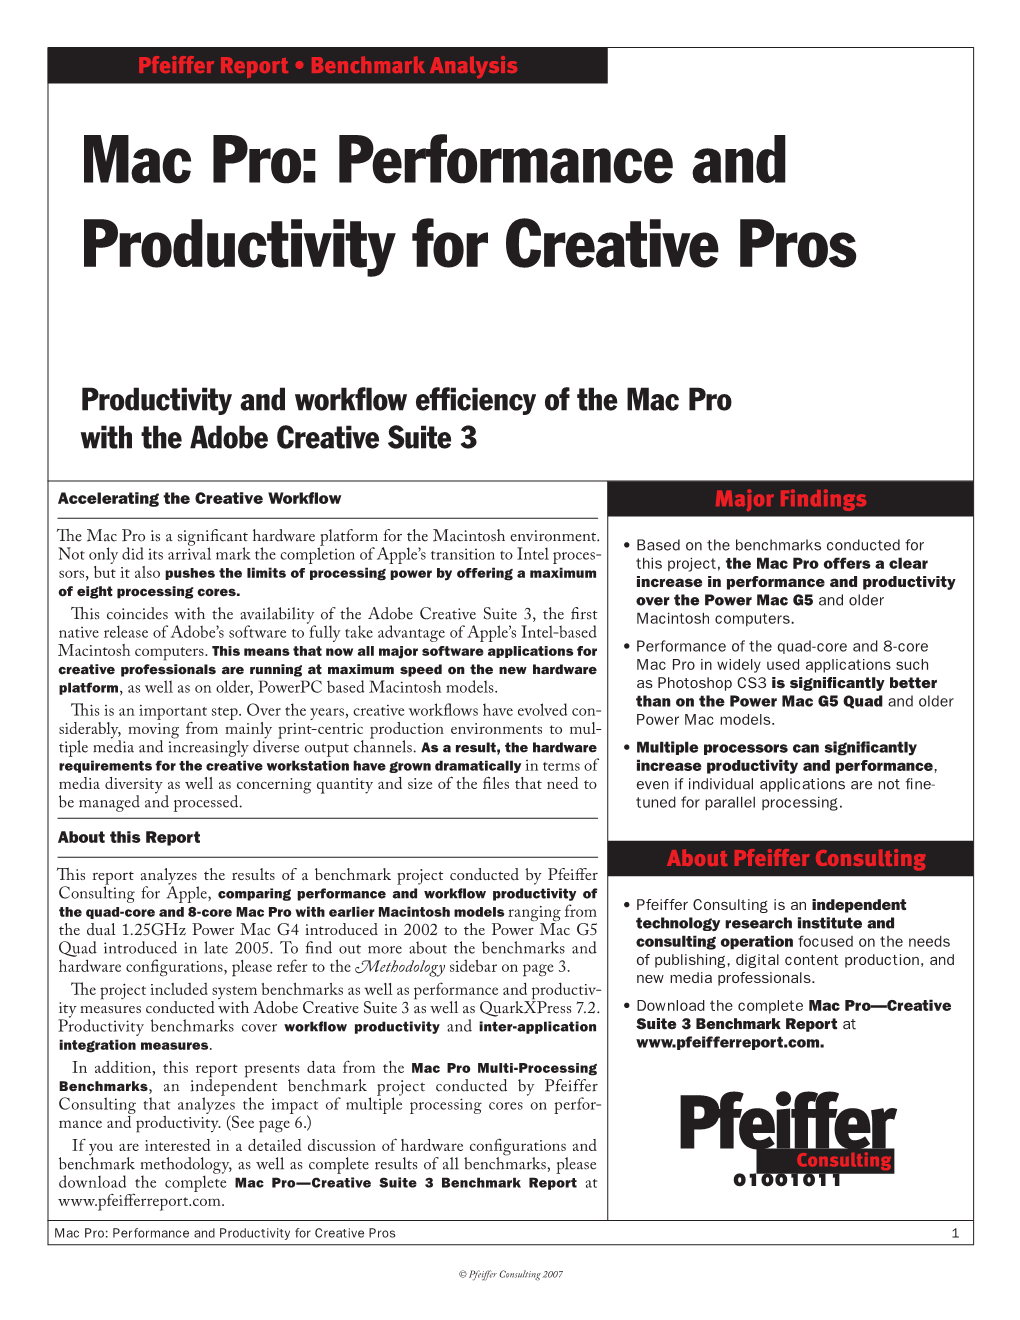 Mac Pro: Performance and Productivity for Creative Pros